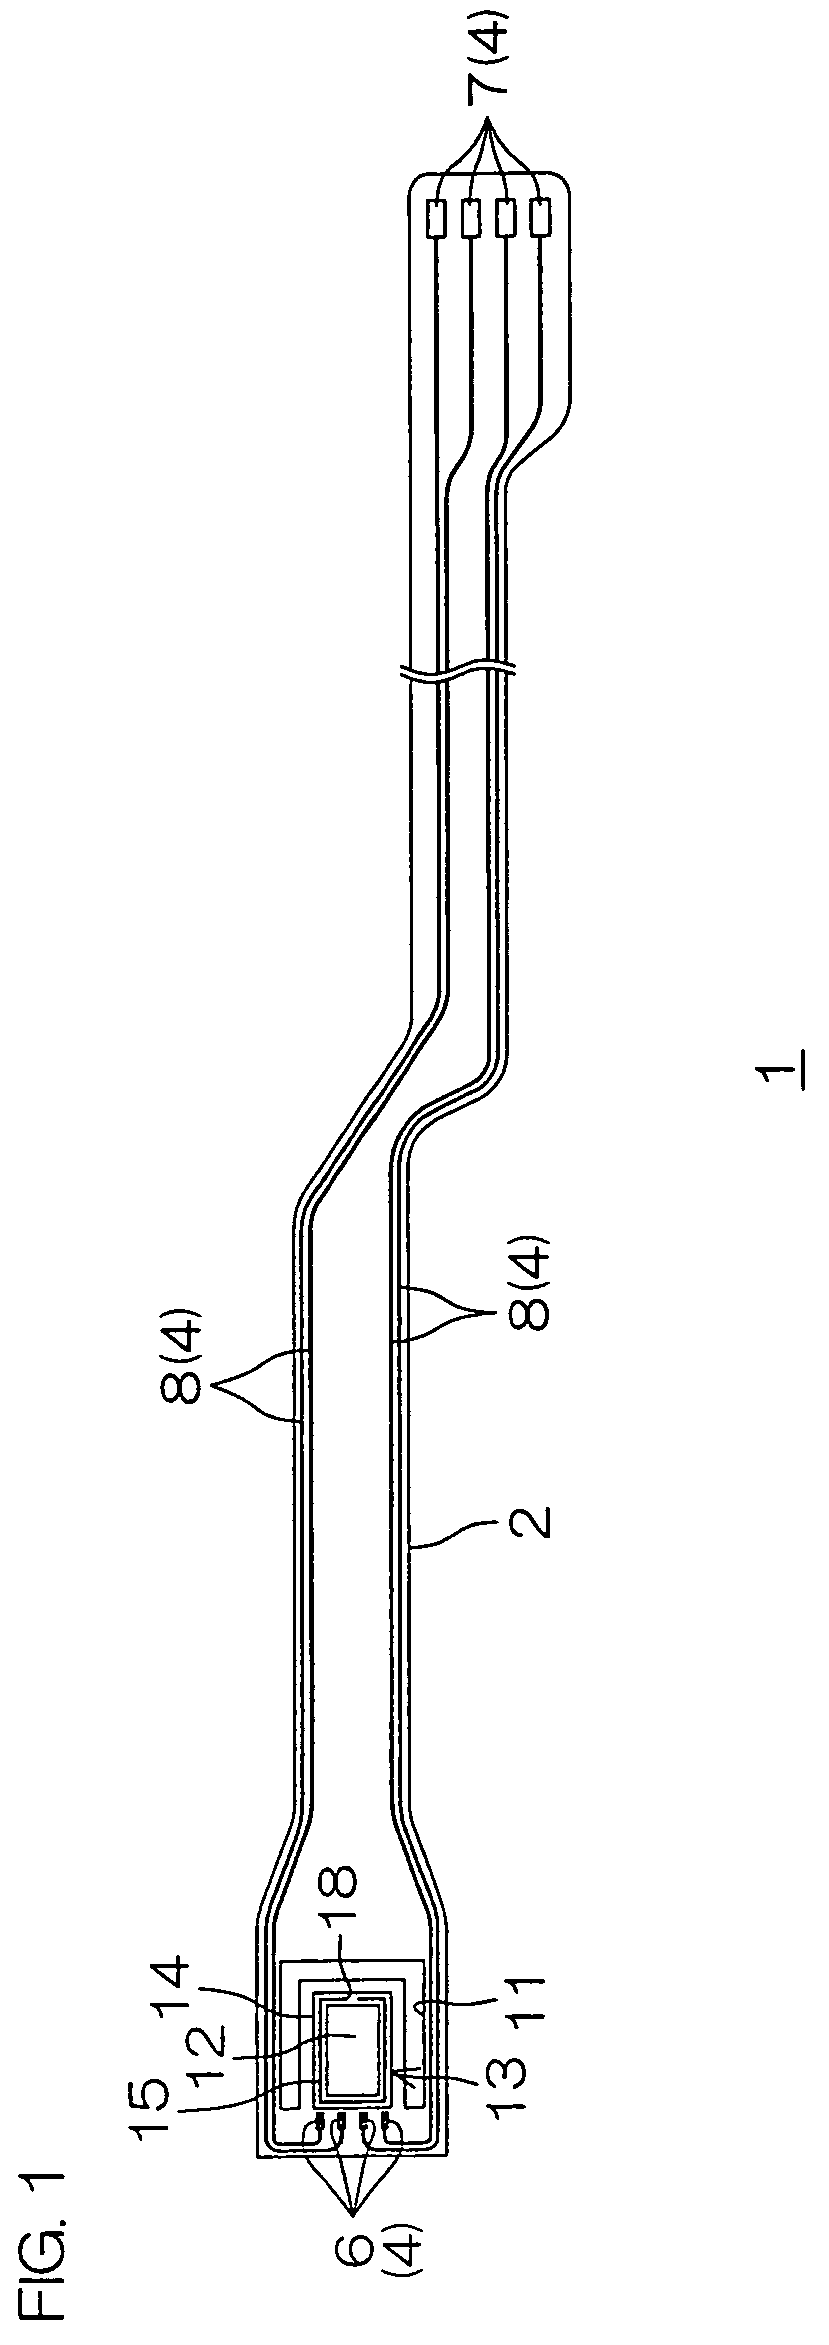 Suspension board with circuit